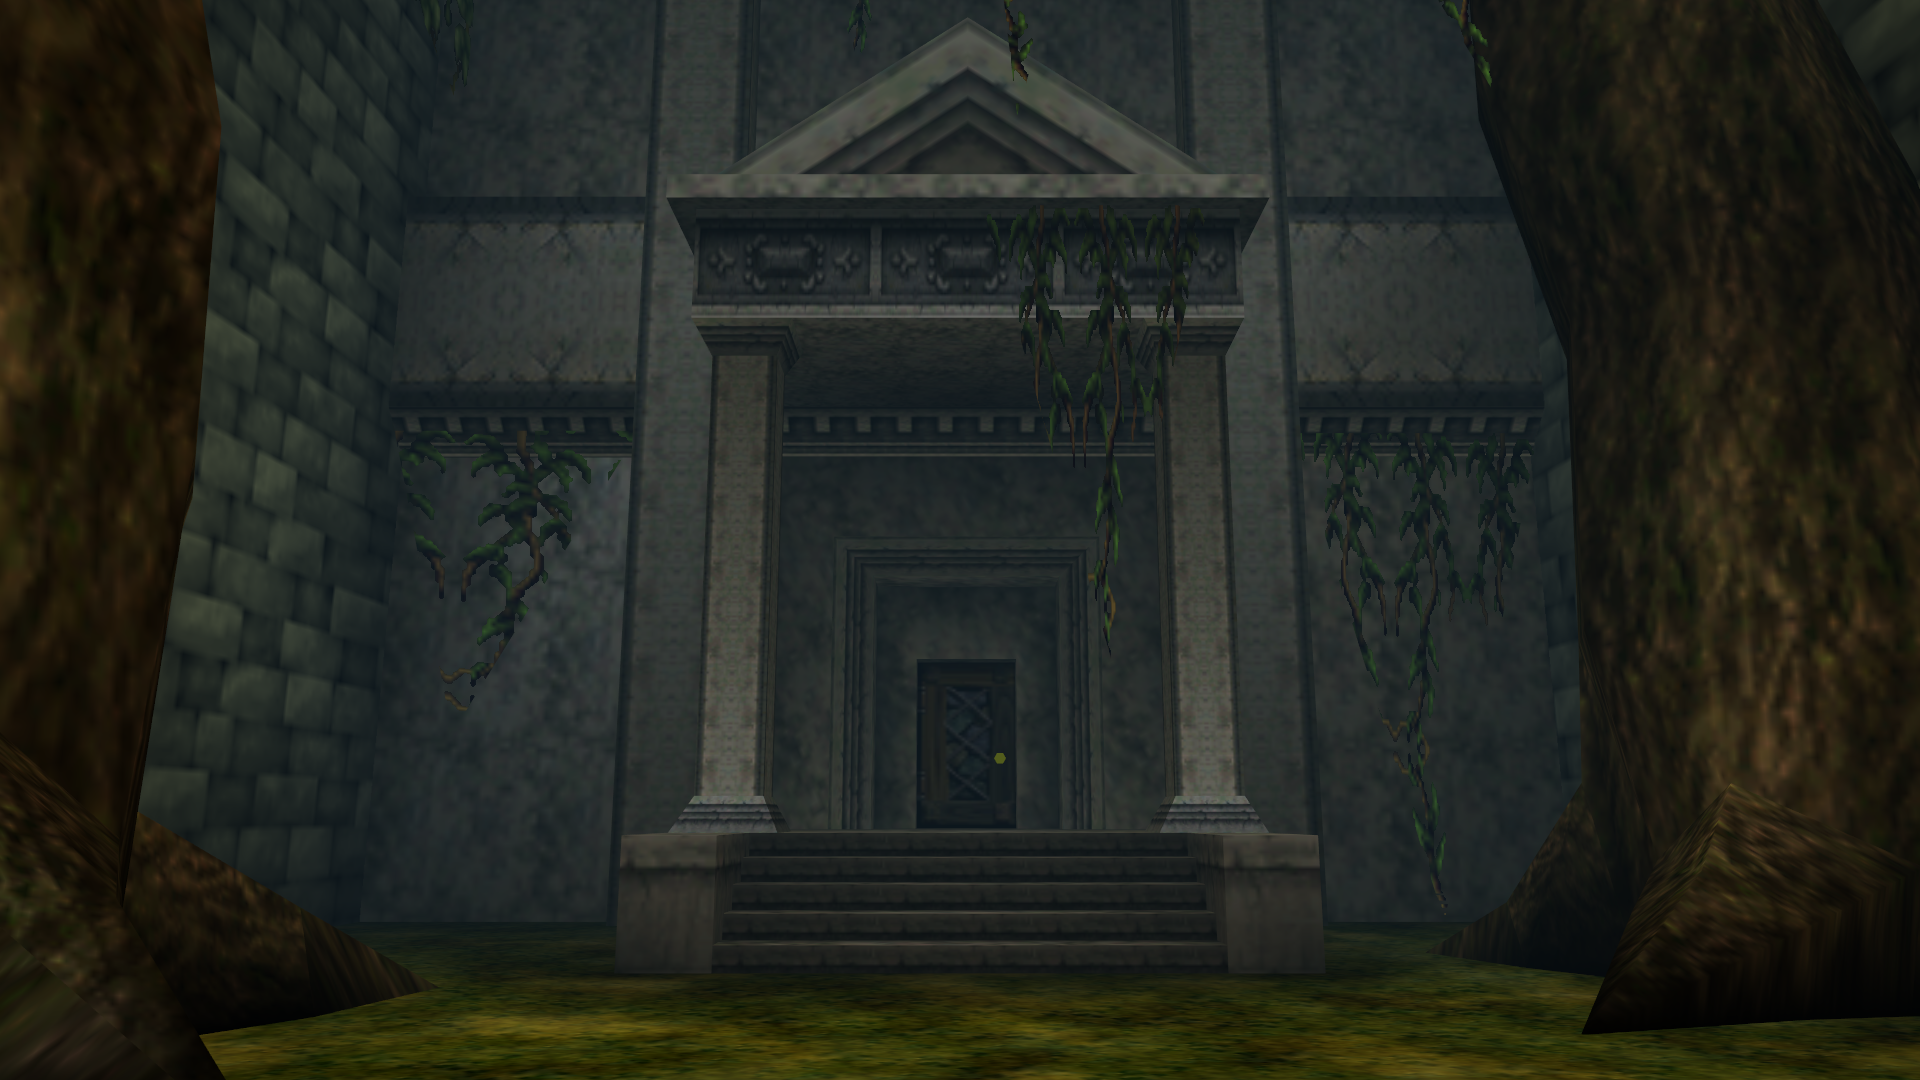 http://vignette4.wikia.nocookie.net/zelda/images/a/a3/Forest_Temple_Entrance_Hall_(Ocarina_of_Time).png/revision/latest?cb=20100426192215